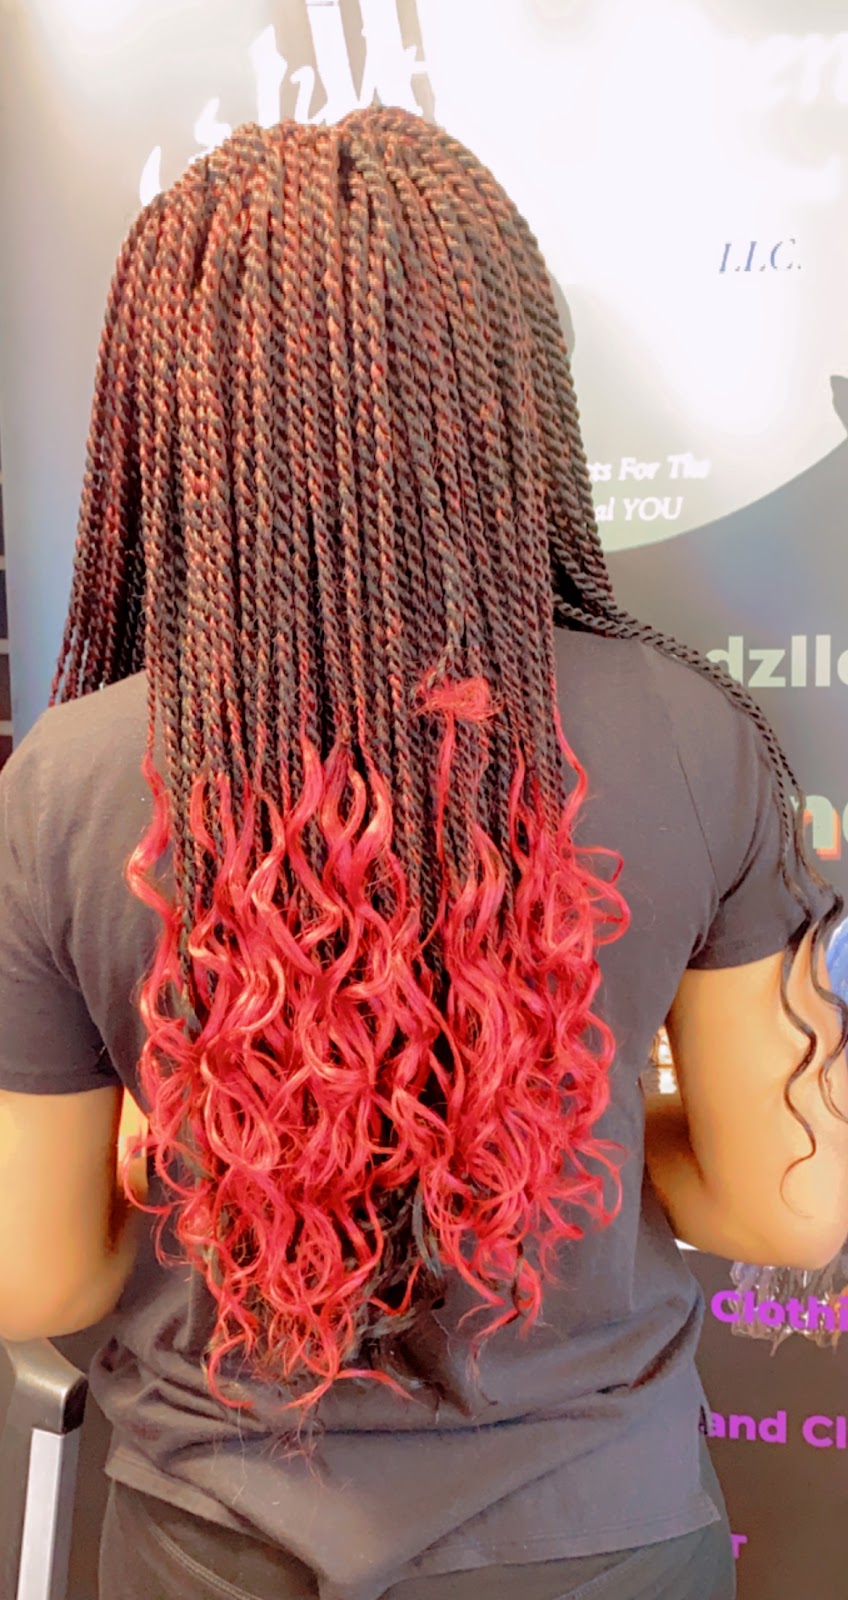 Kulture Trendz All Things Hair and Beauty LLC.